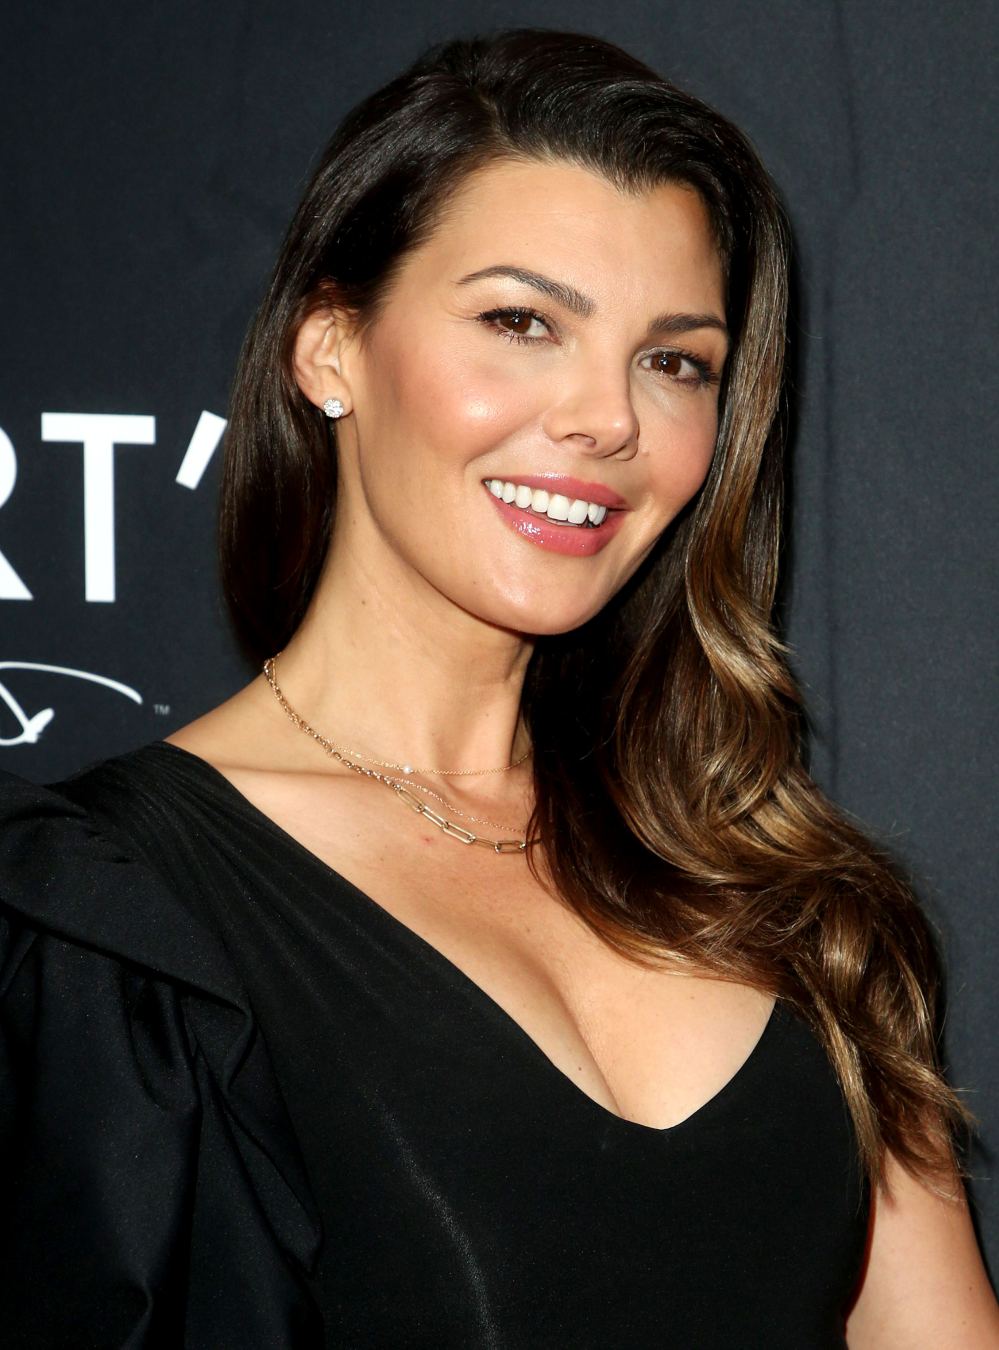 Ali Landry Shares Her Healthy Holiday Eating Tips